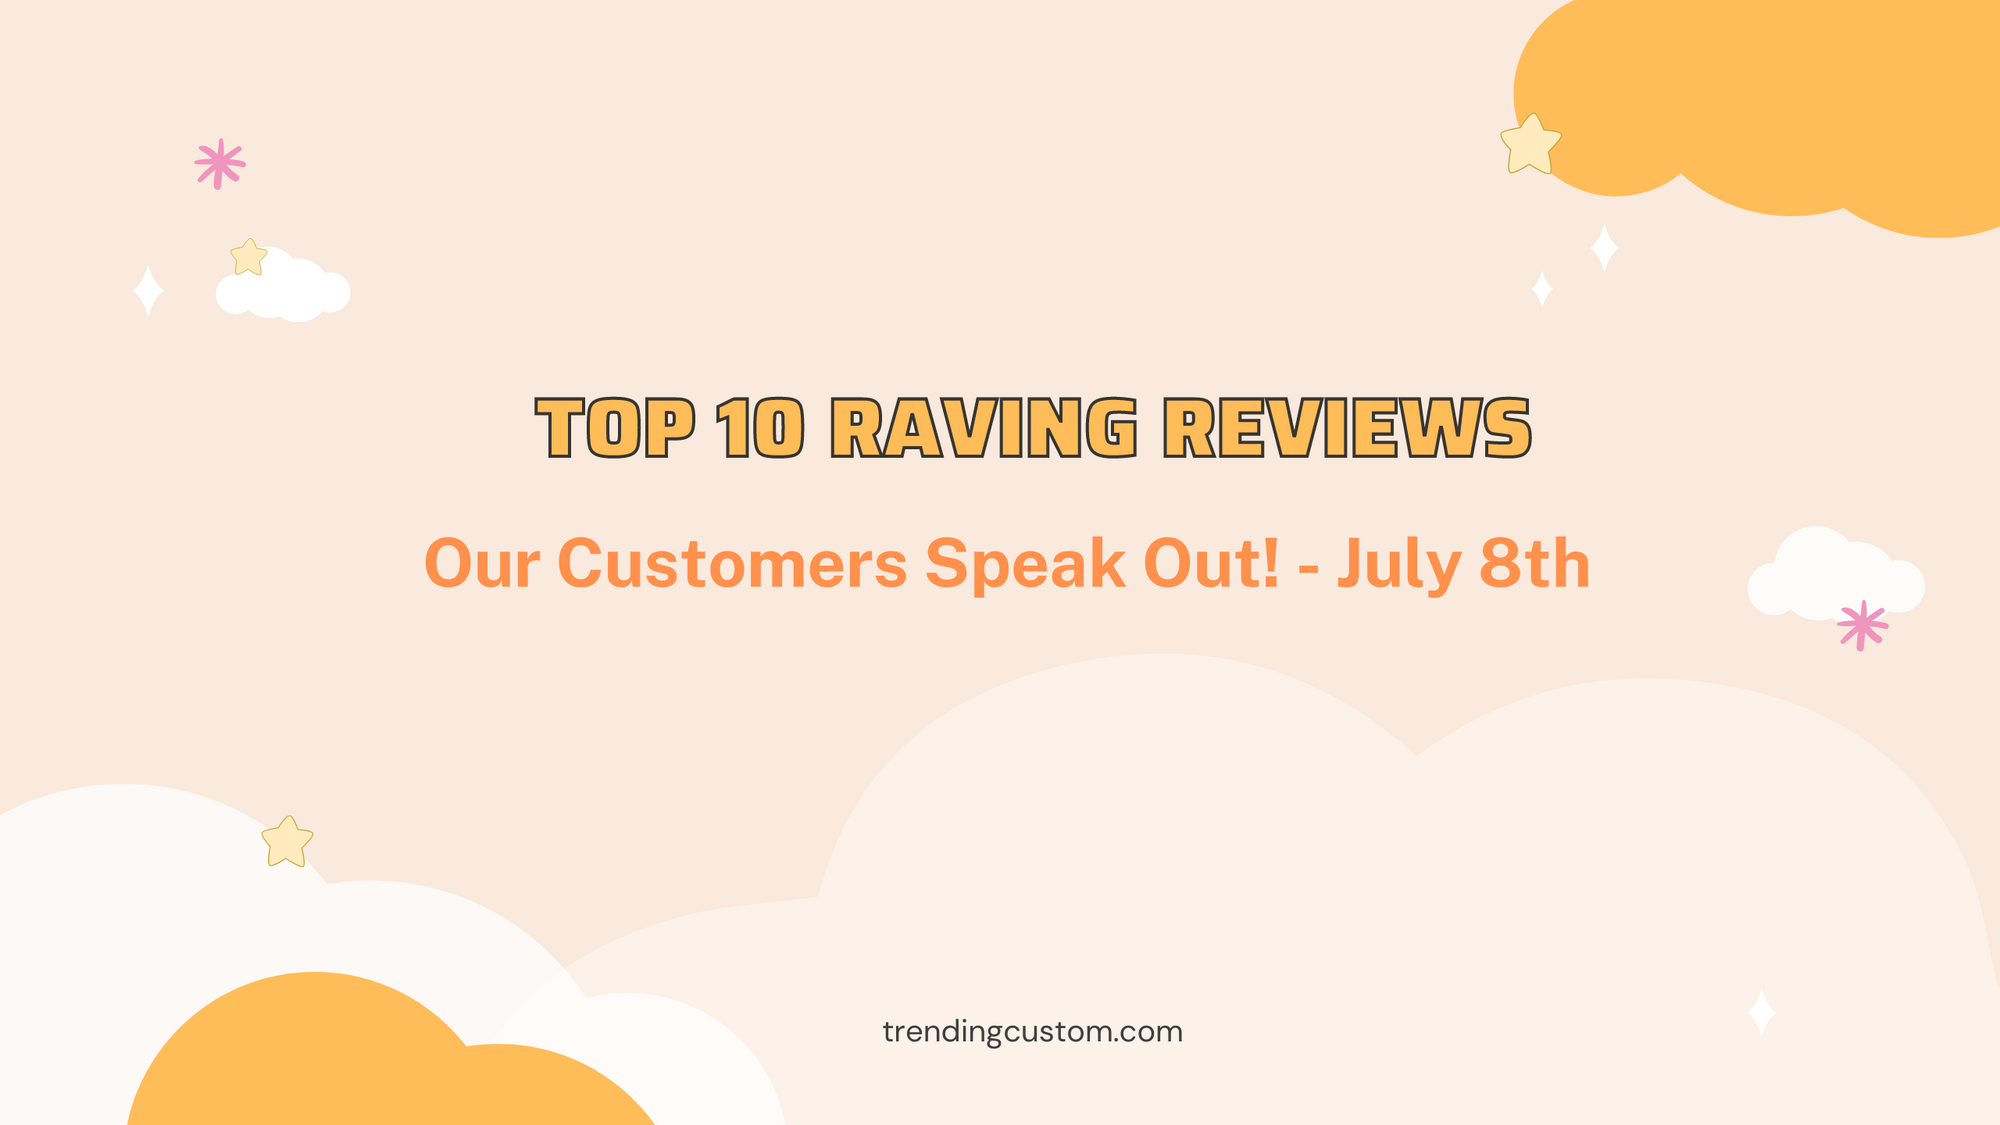 Top 10 Raving Reviews: Our Customers Speak Out! - July 8th